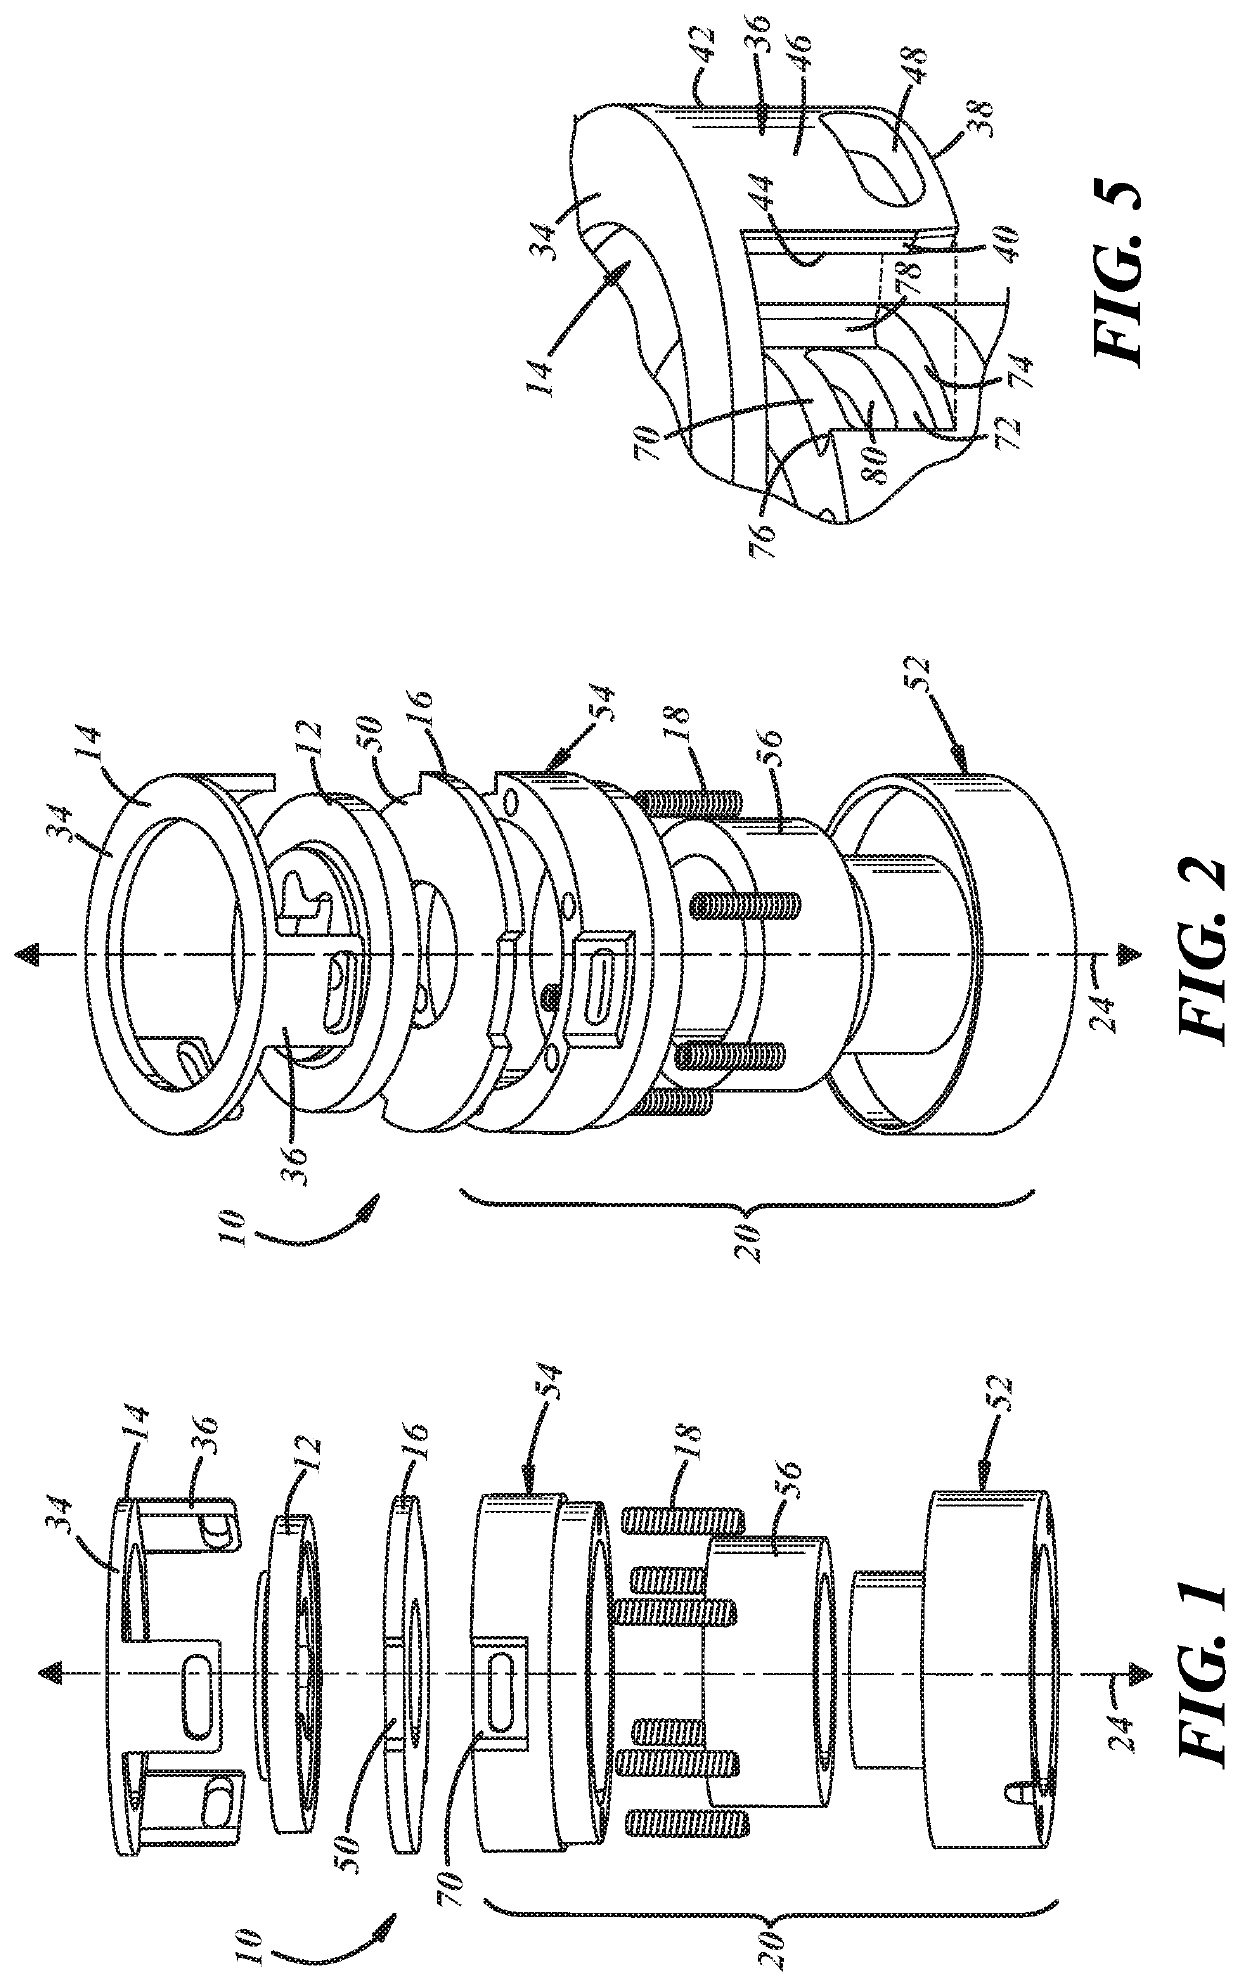 Miniature brake and method of assembly